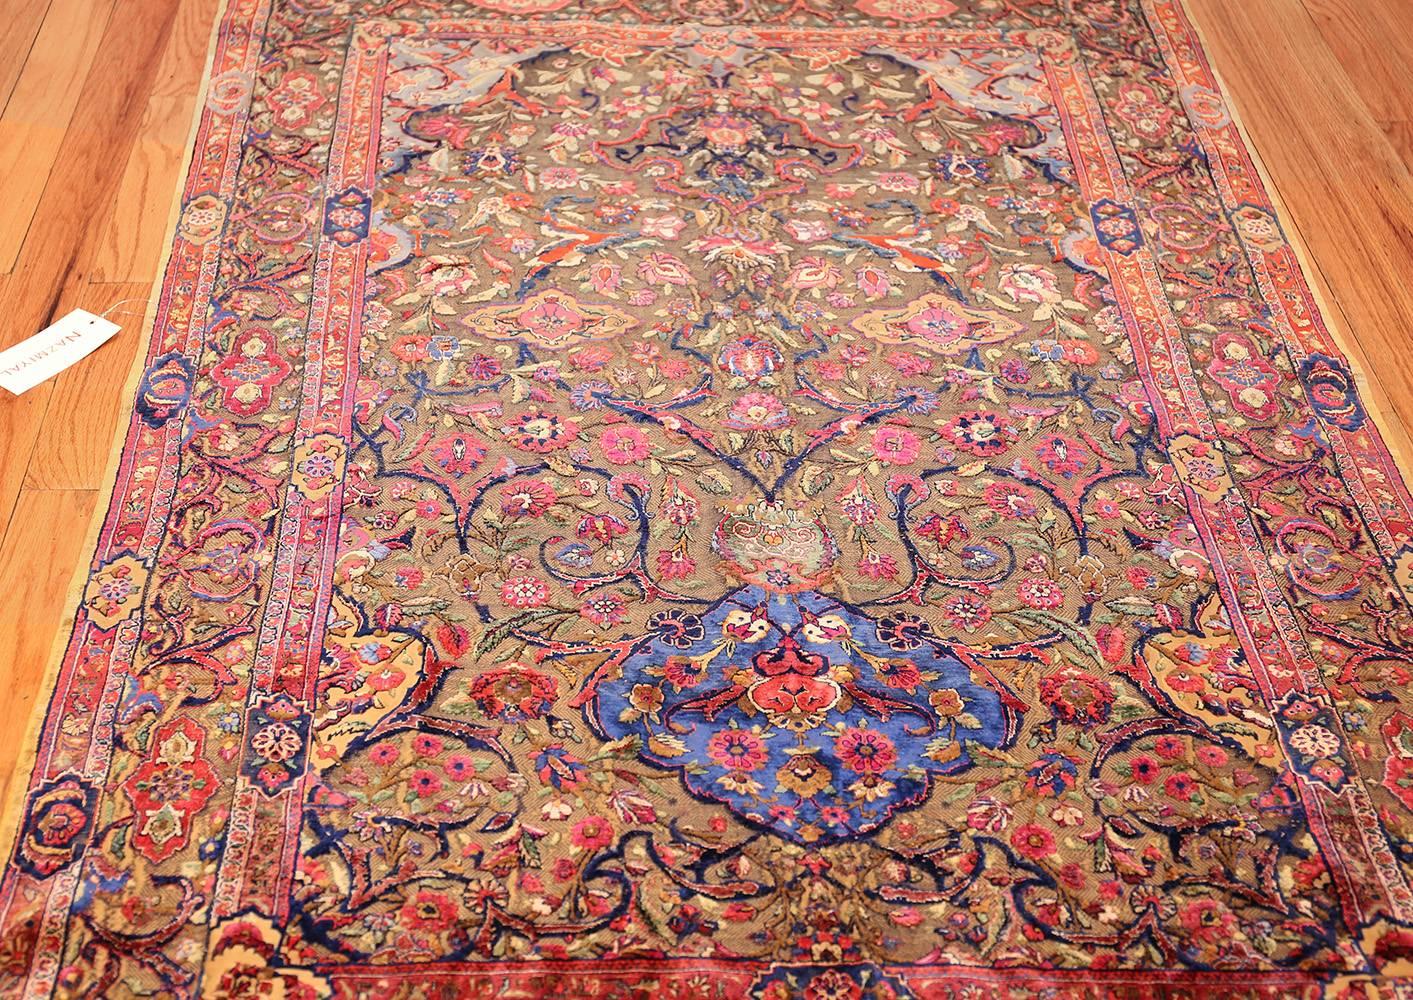 Hand-Knotted Antique Metallic Threading Silk Souf Kashan Persian Rug